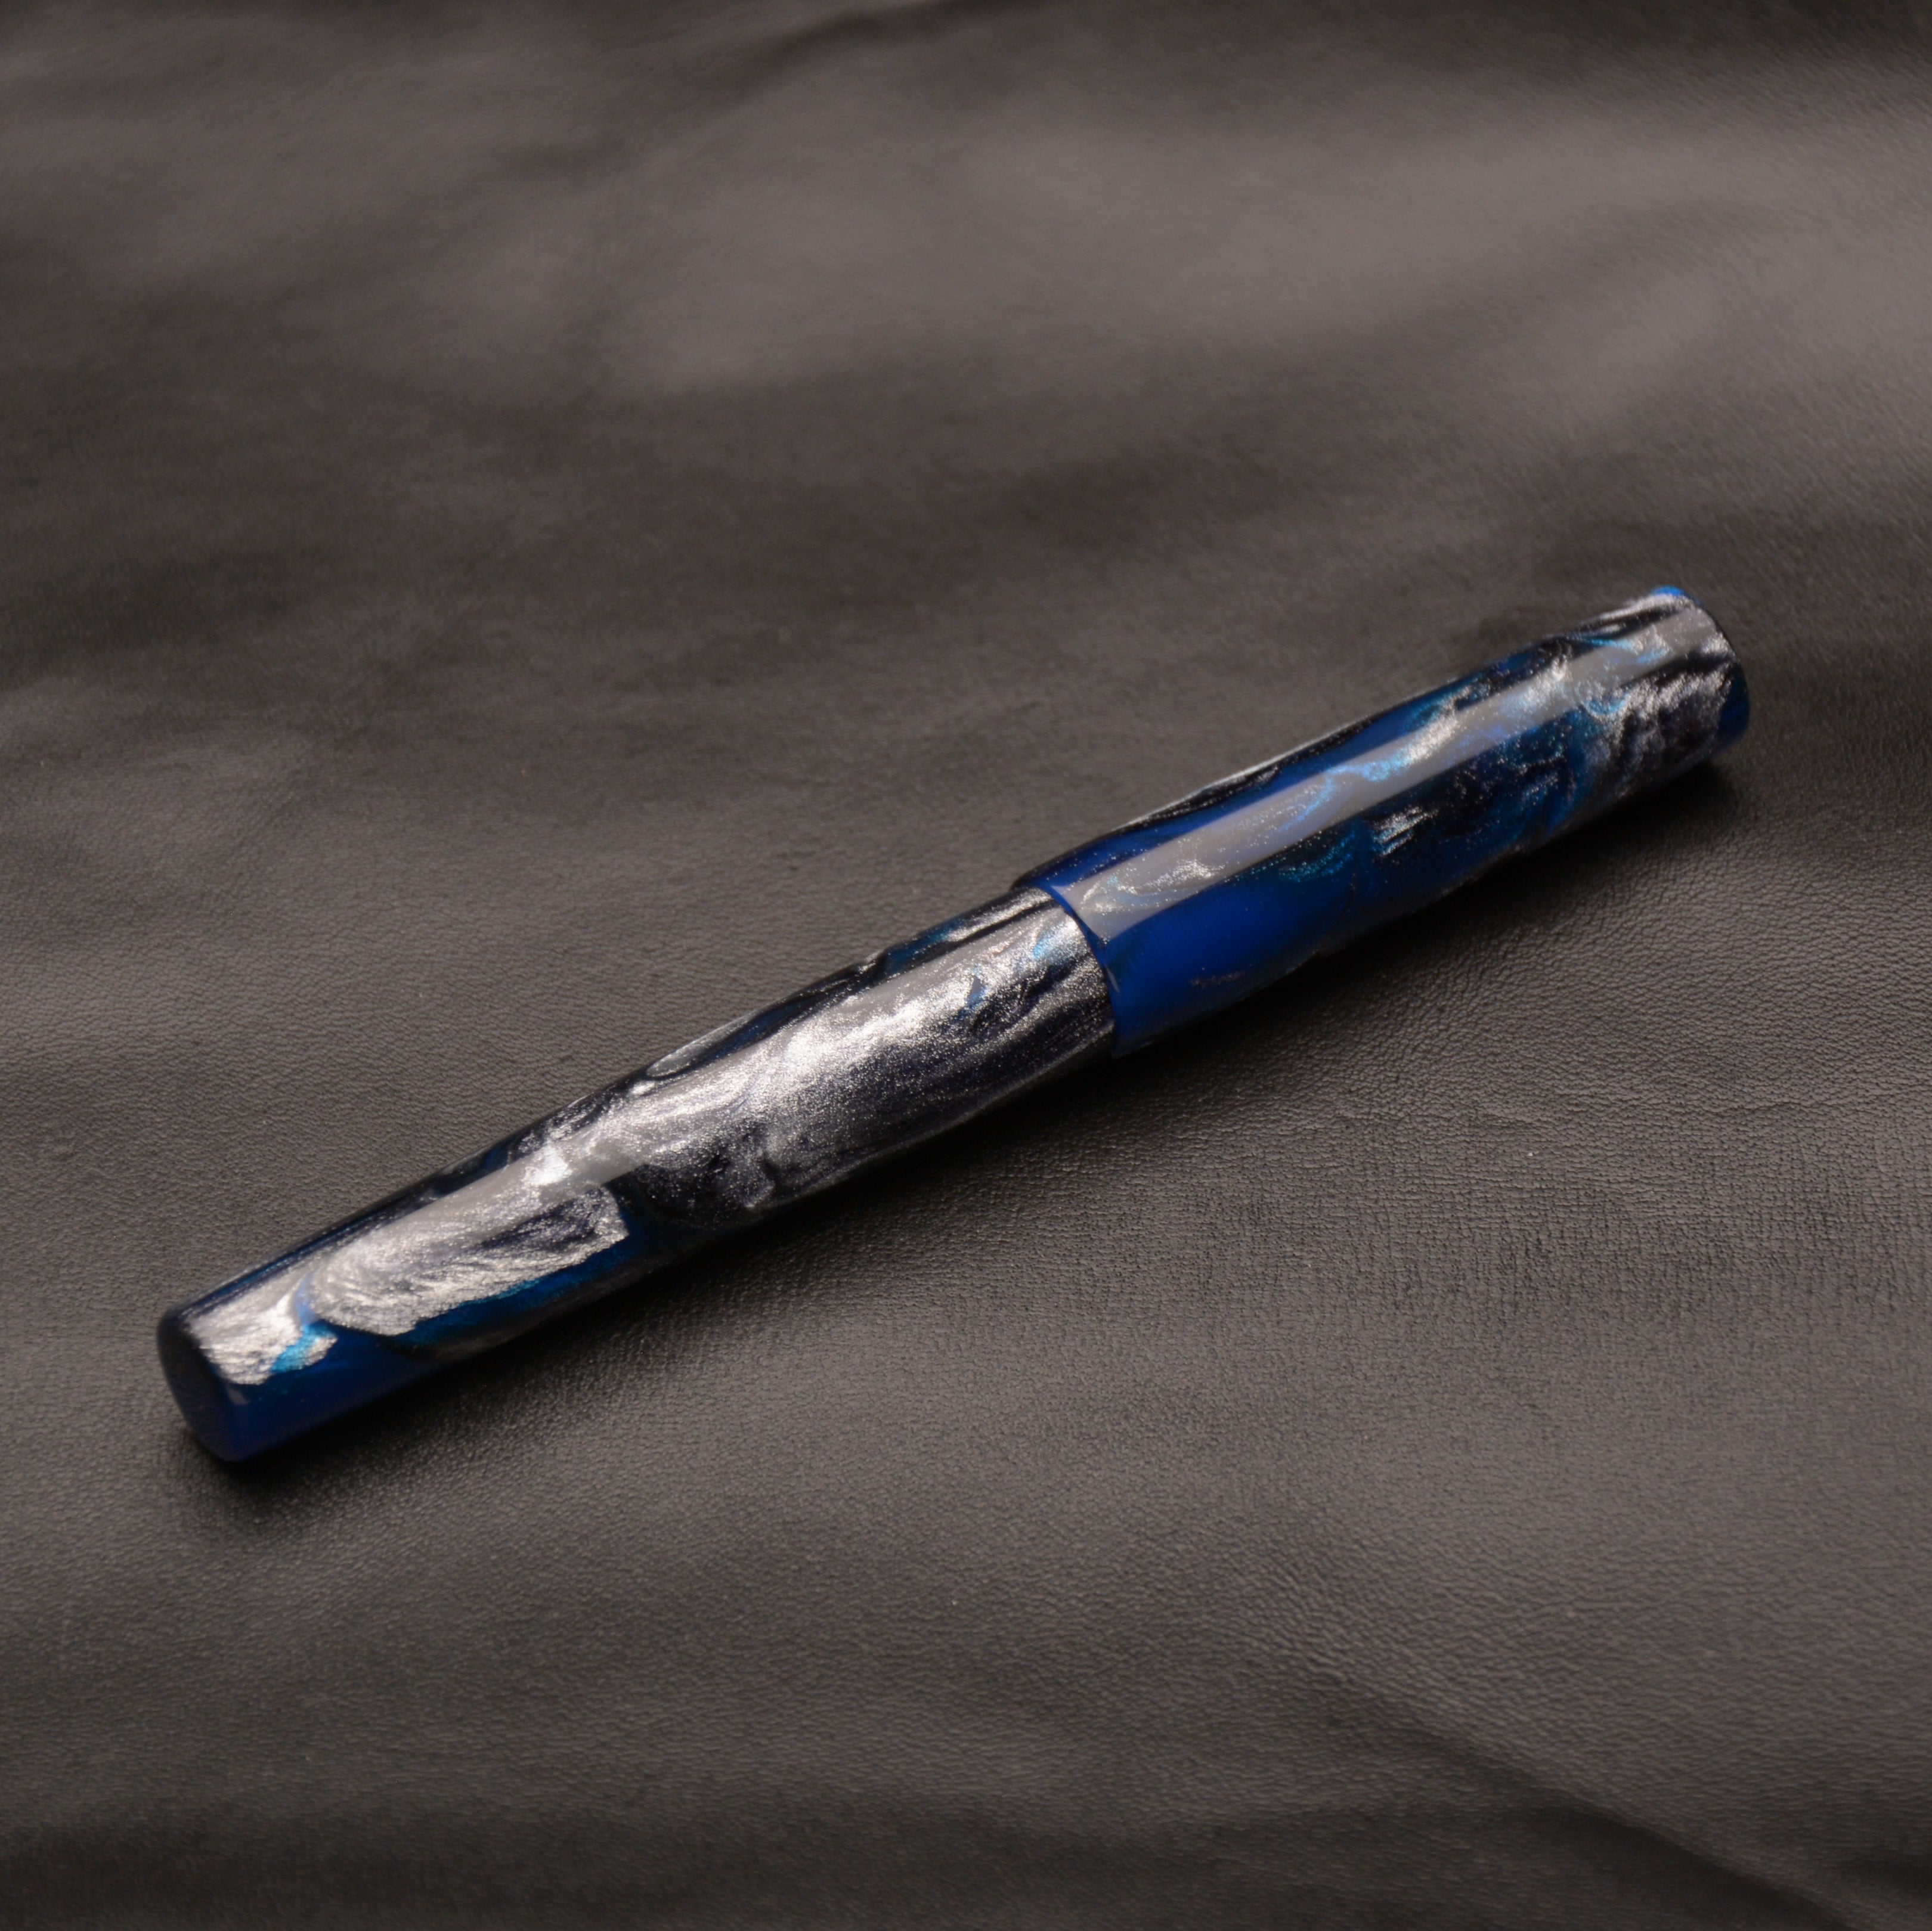 Fountain Pen - Bock #6 - 13 mm - In-house cast with blue, black and metallic silver